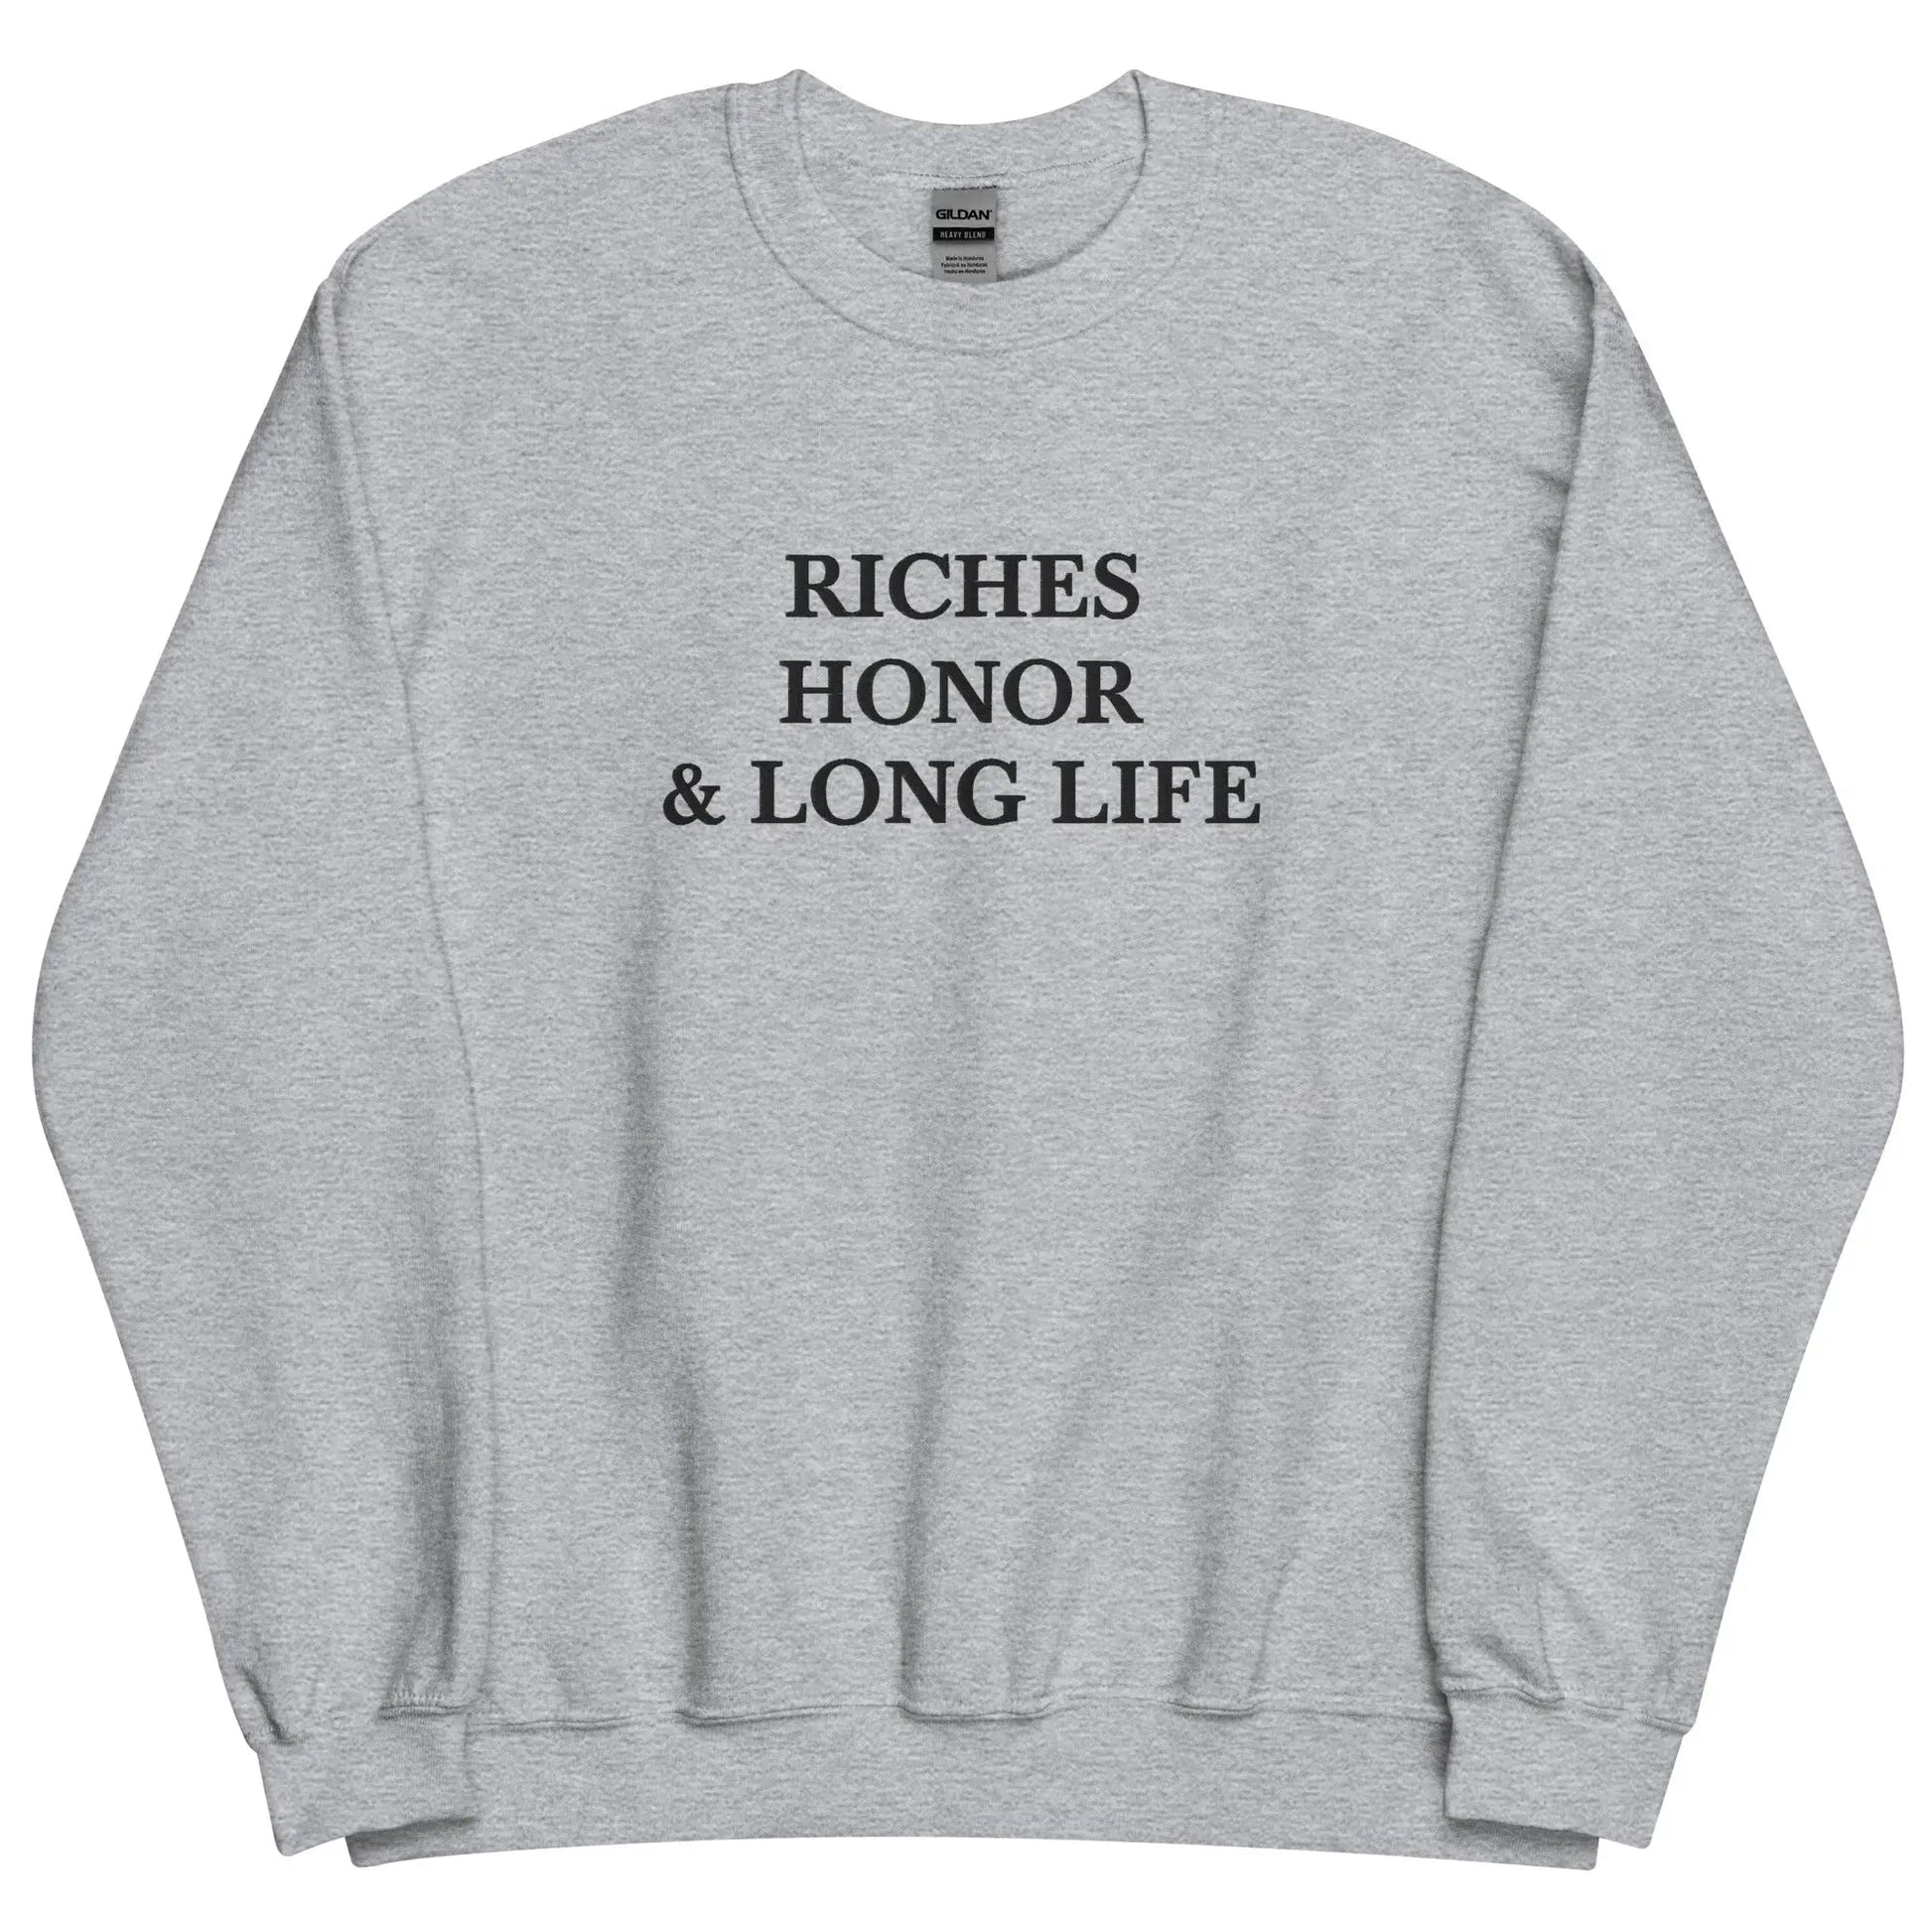 Embroidered Riches Honor & Long Life Crewneck Sweatshirt-clothes- sweater-Sport Grey-S-mysticalcherry